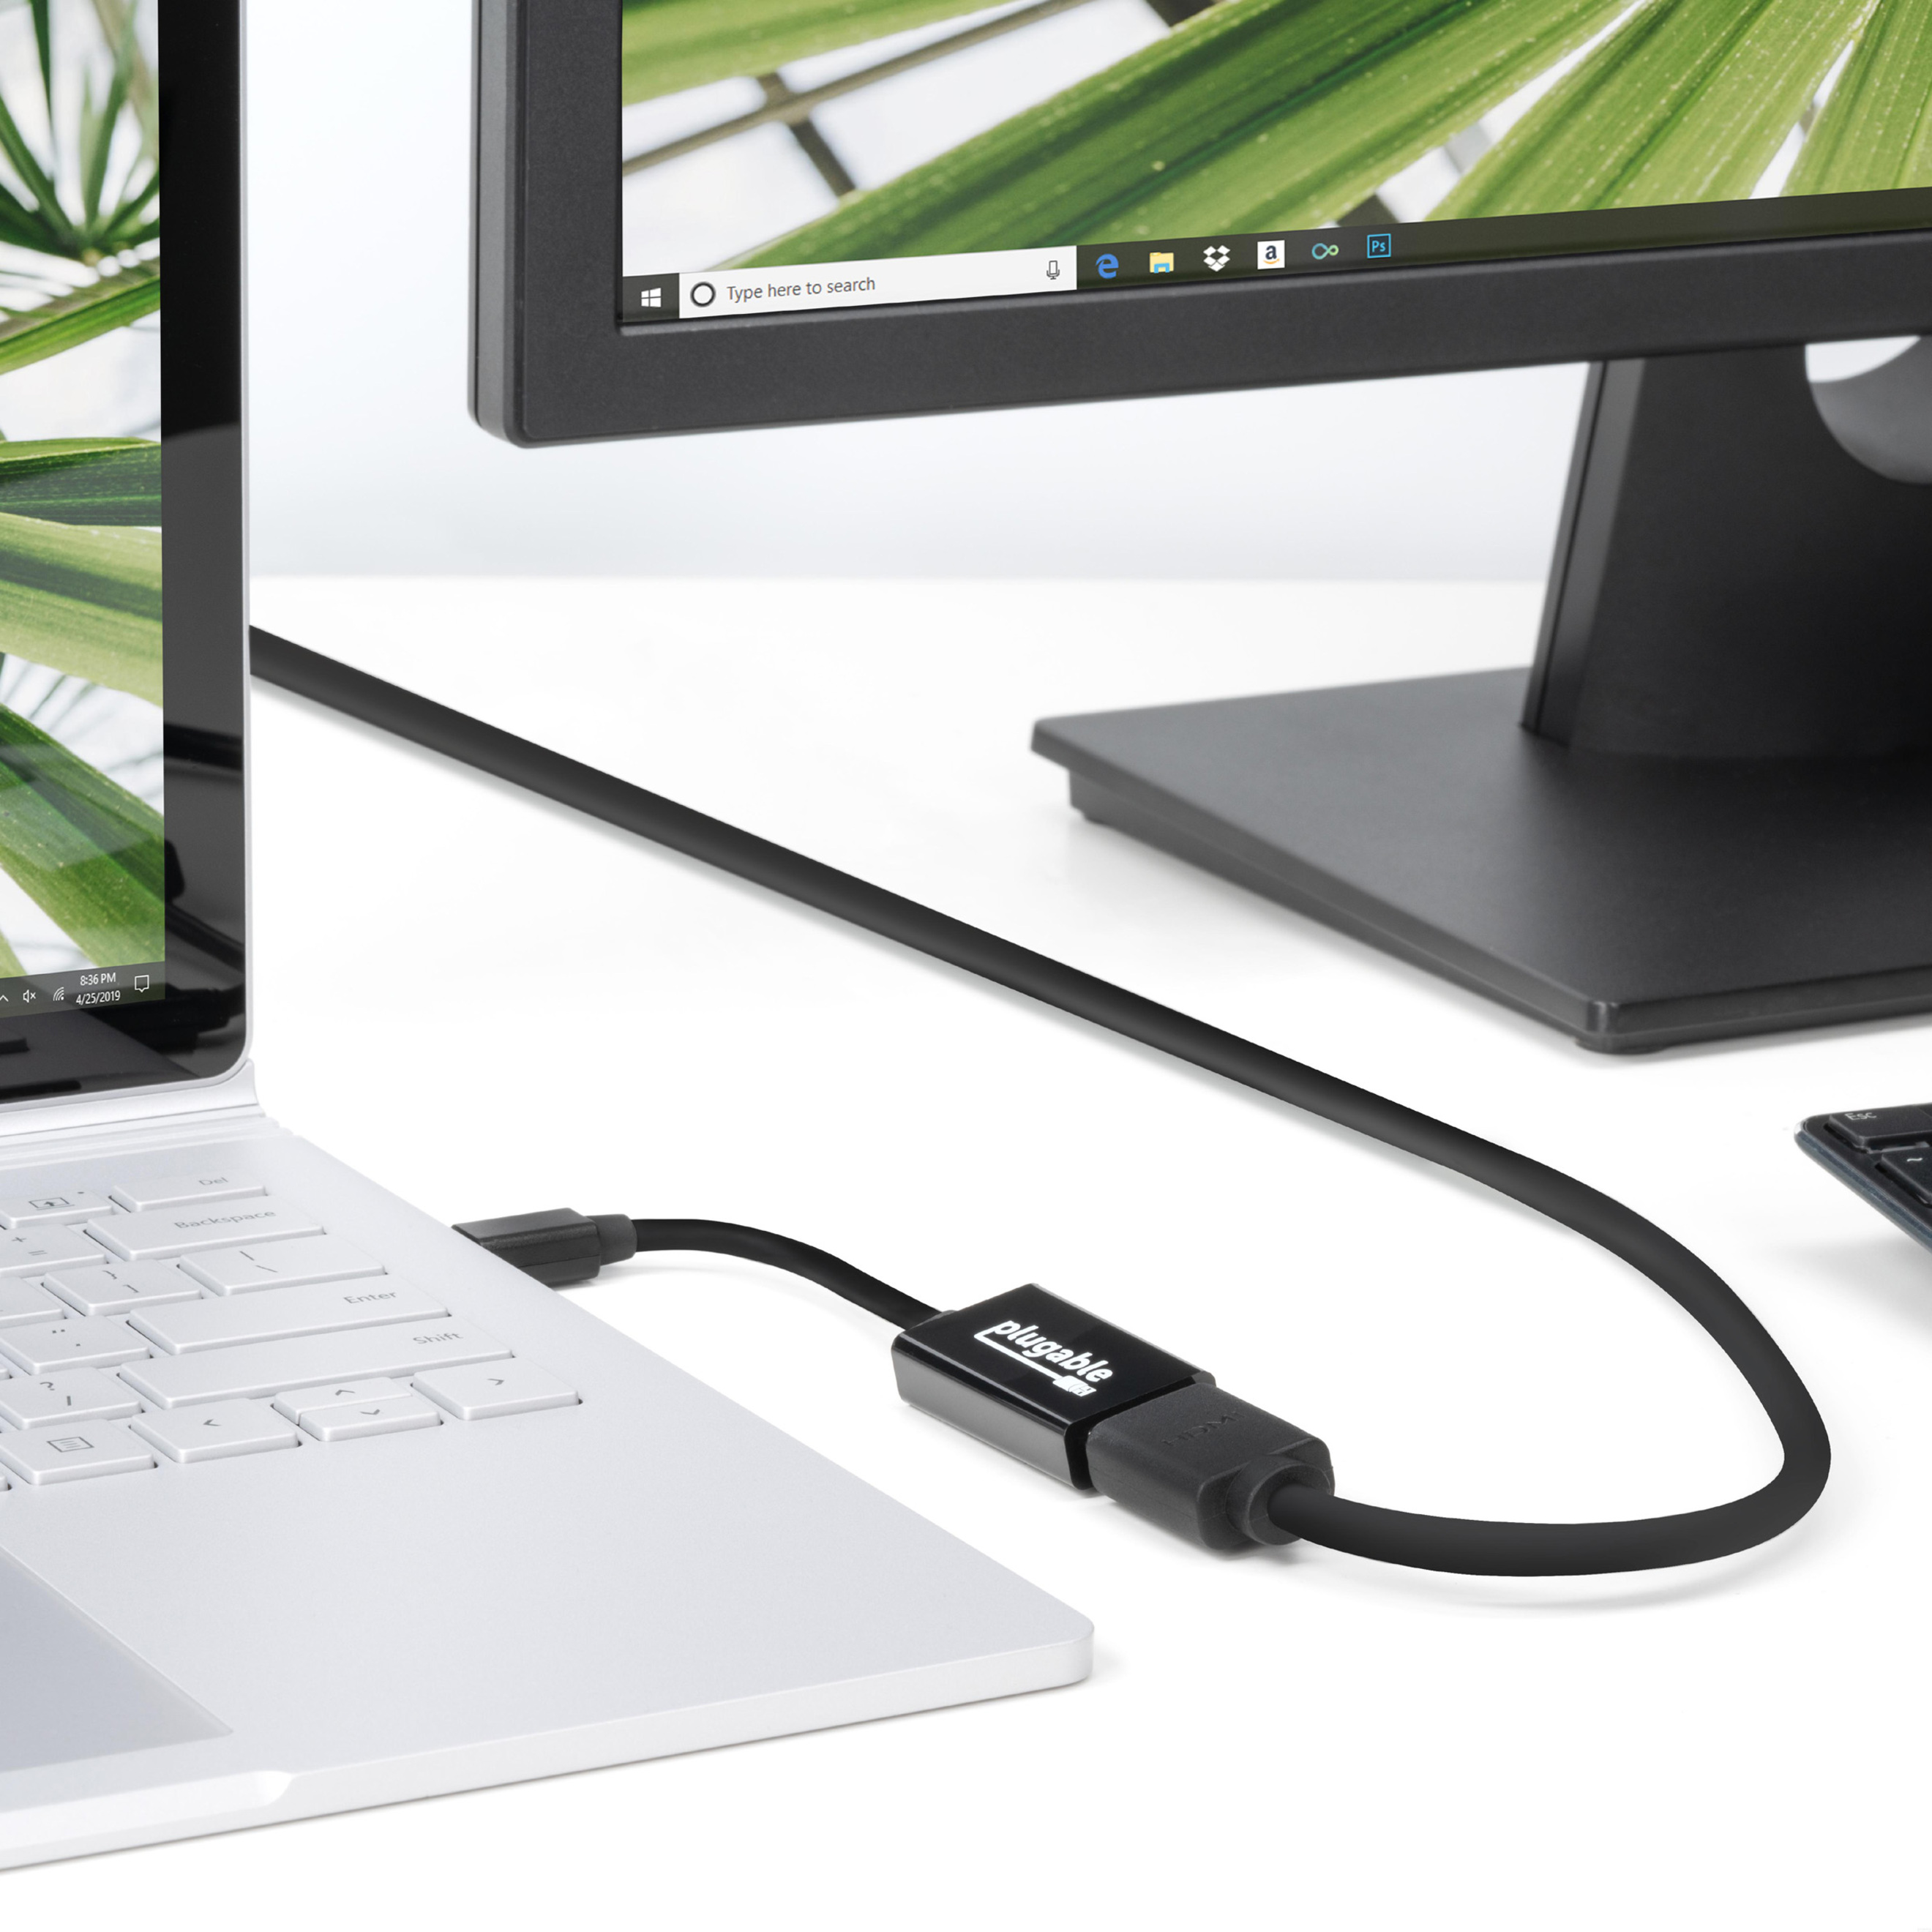 Plugable Mini DisplayPort/Thunderbolt 2 to HDMI 2.0 Adapter for Older Macs and Surface PCs with MDP Ports - Driverless - image 4 of 7